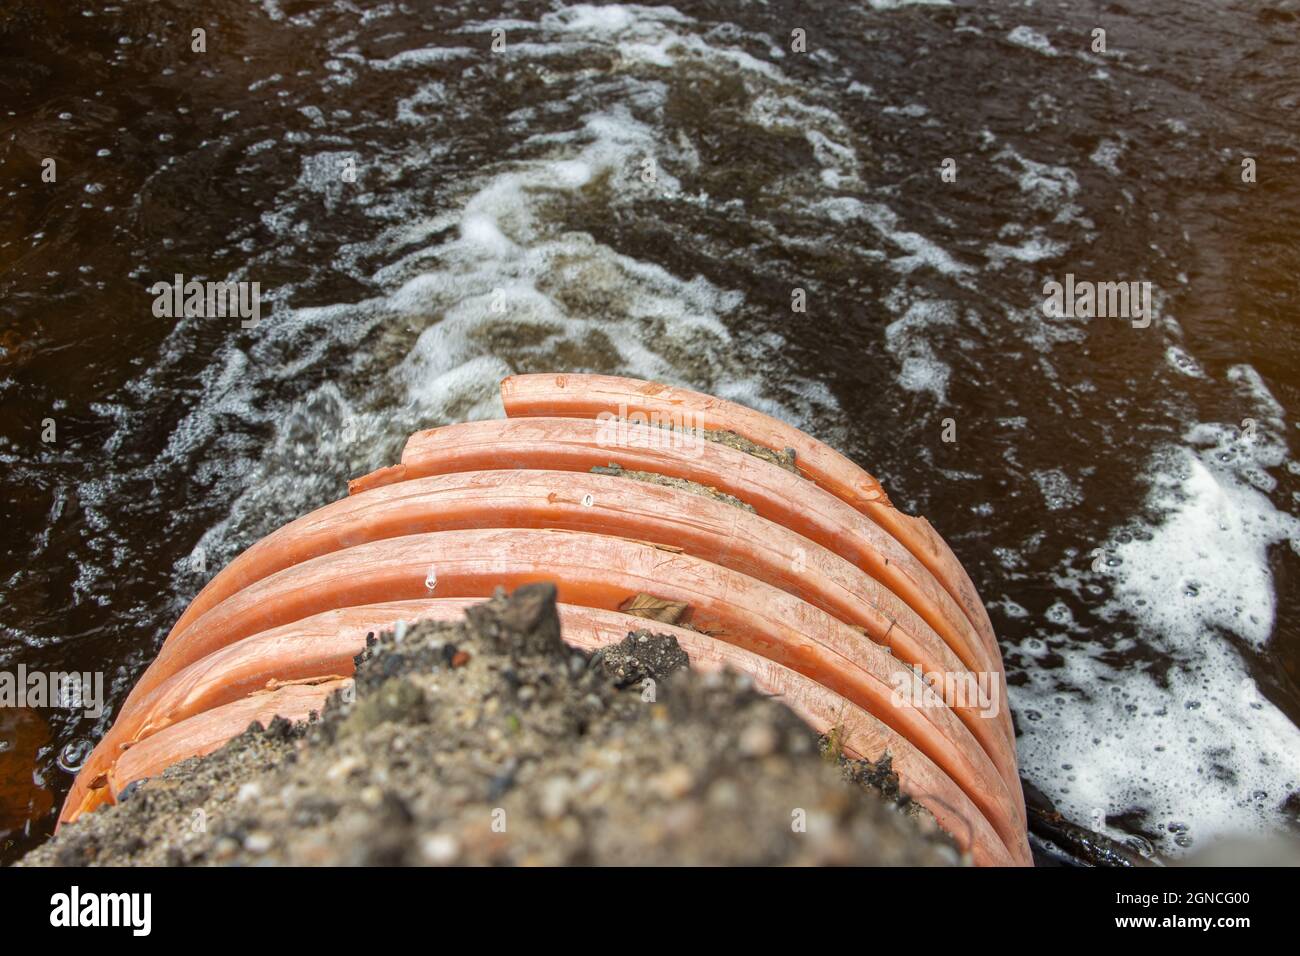 A stream of water flows from a large flexible pipe - hose. Stock Photo